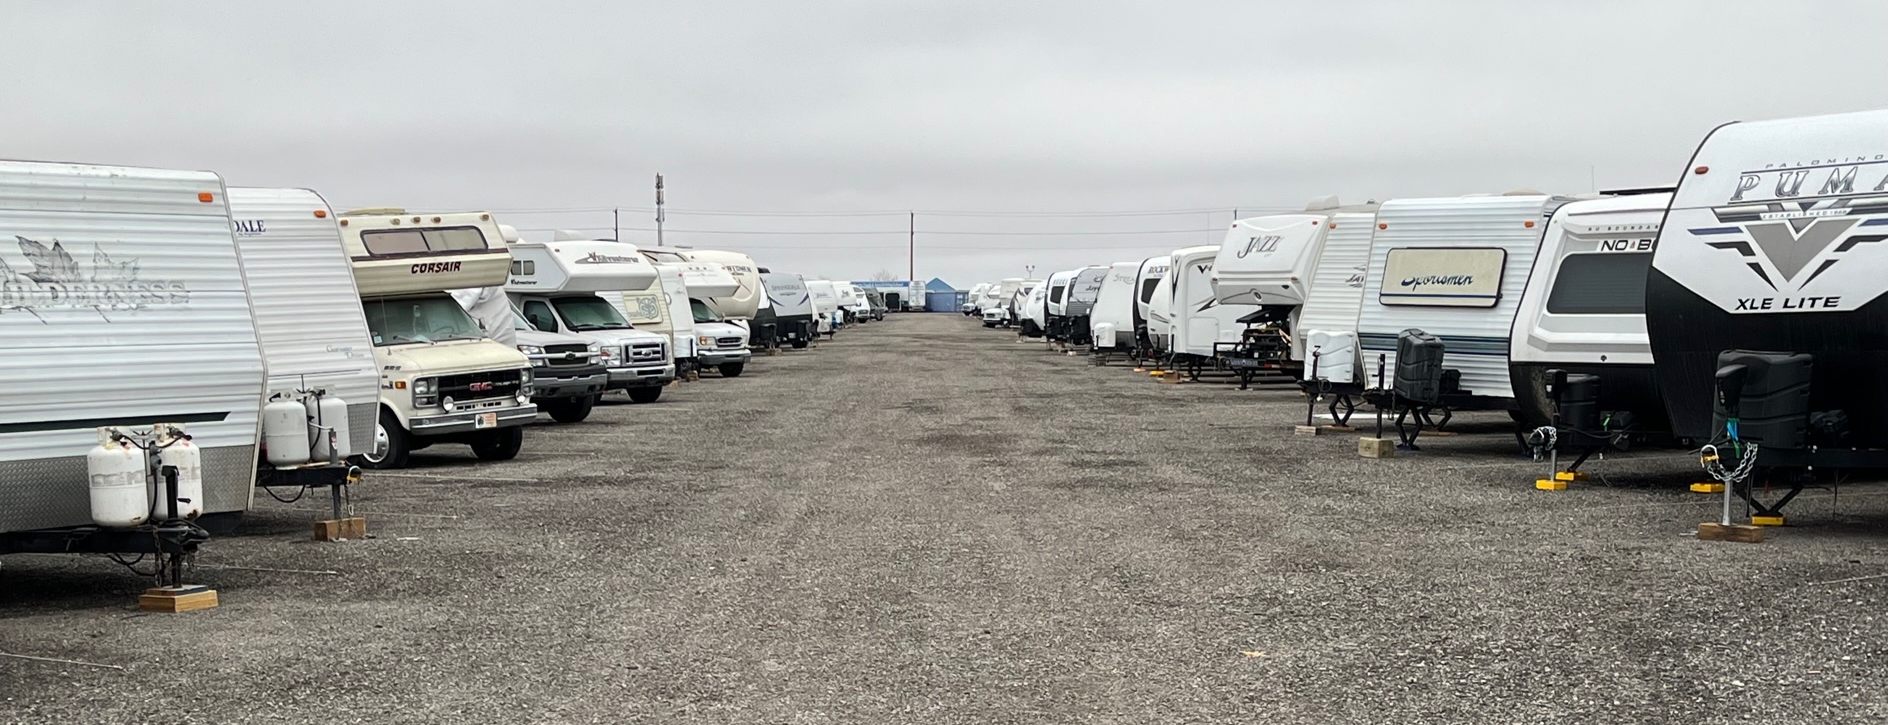 RVs and other vehicles parked in a storage lot